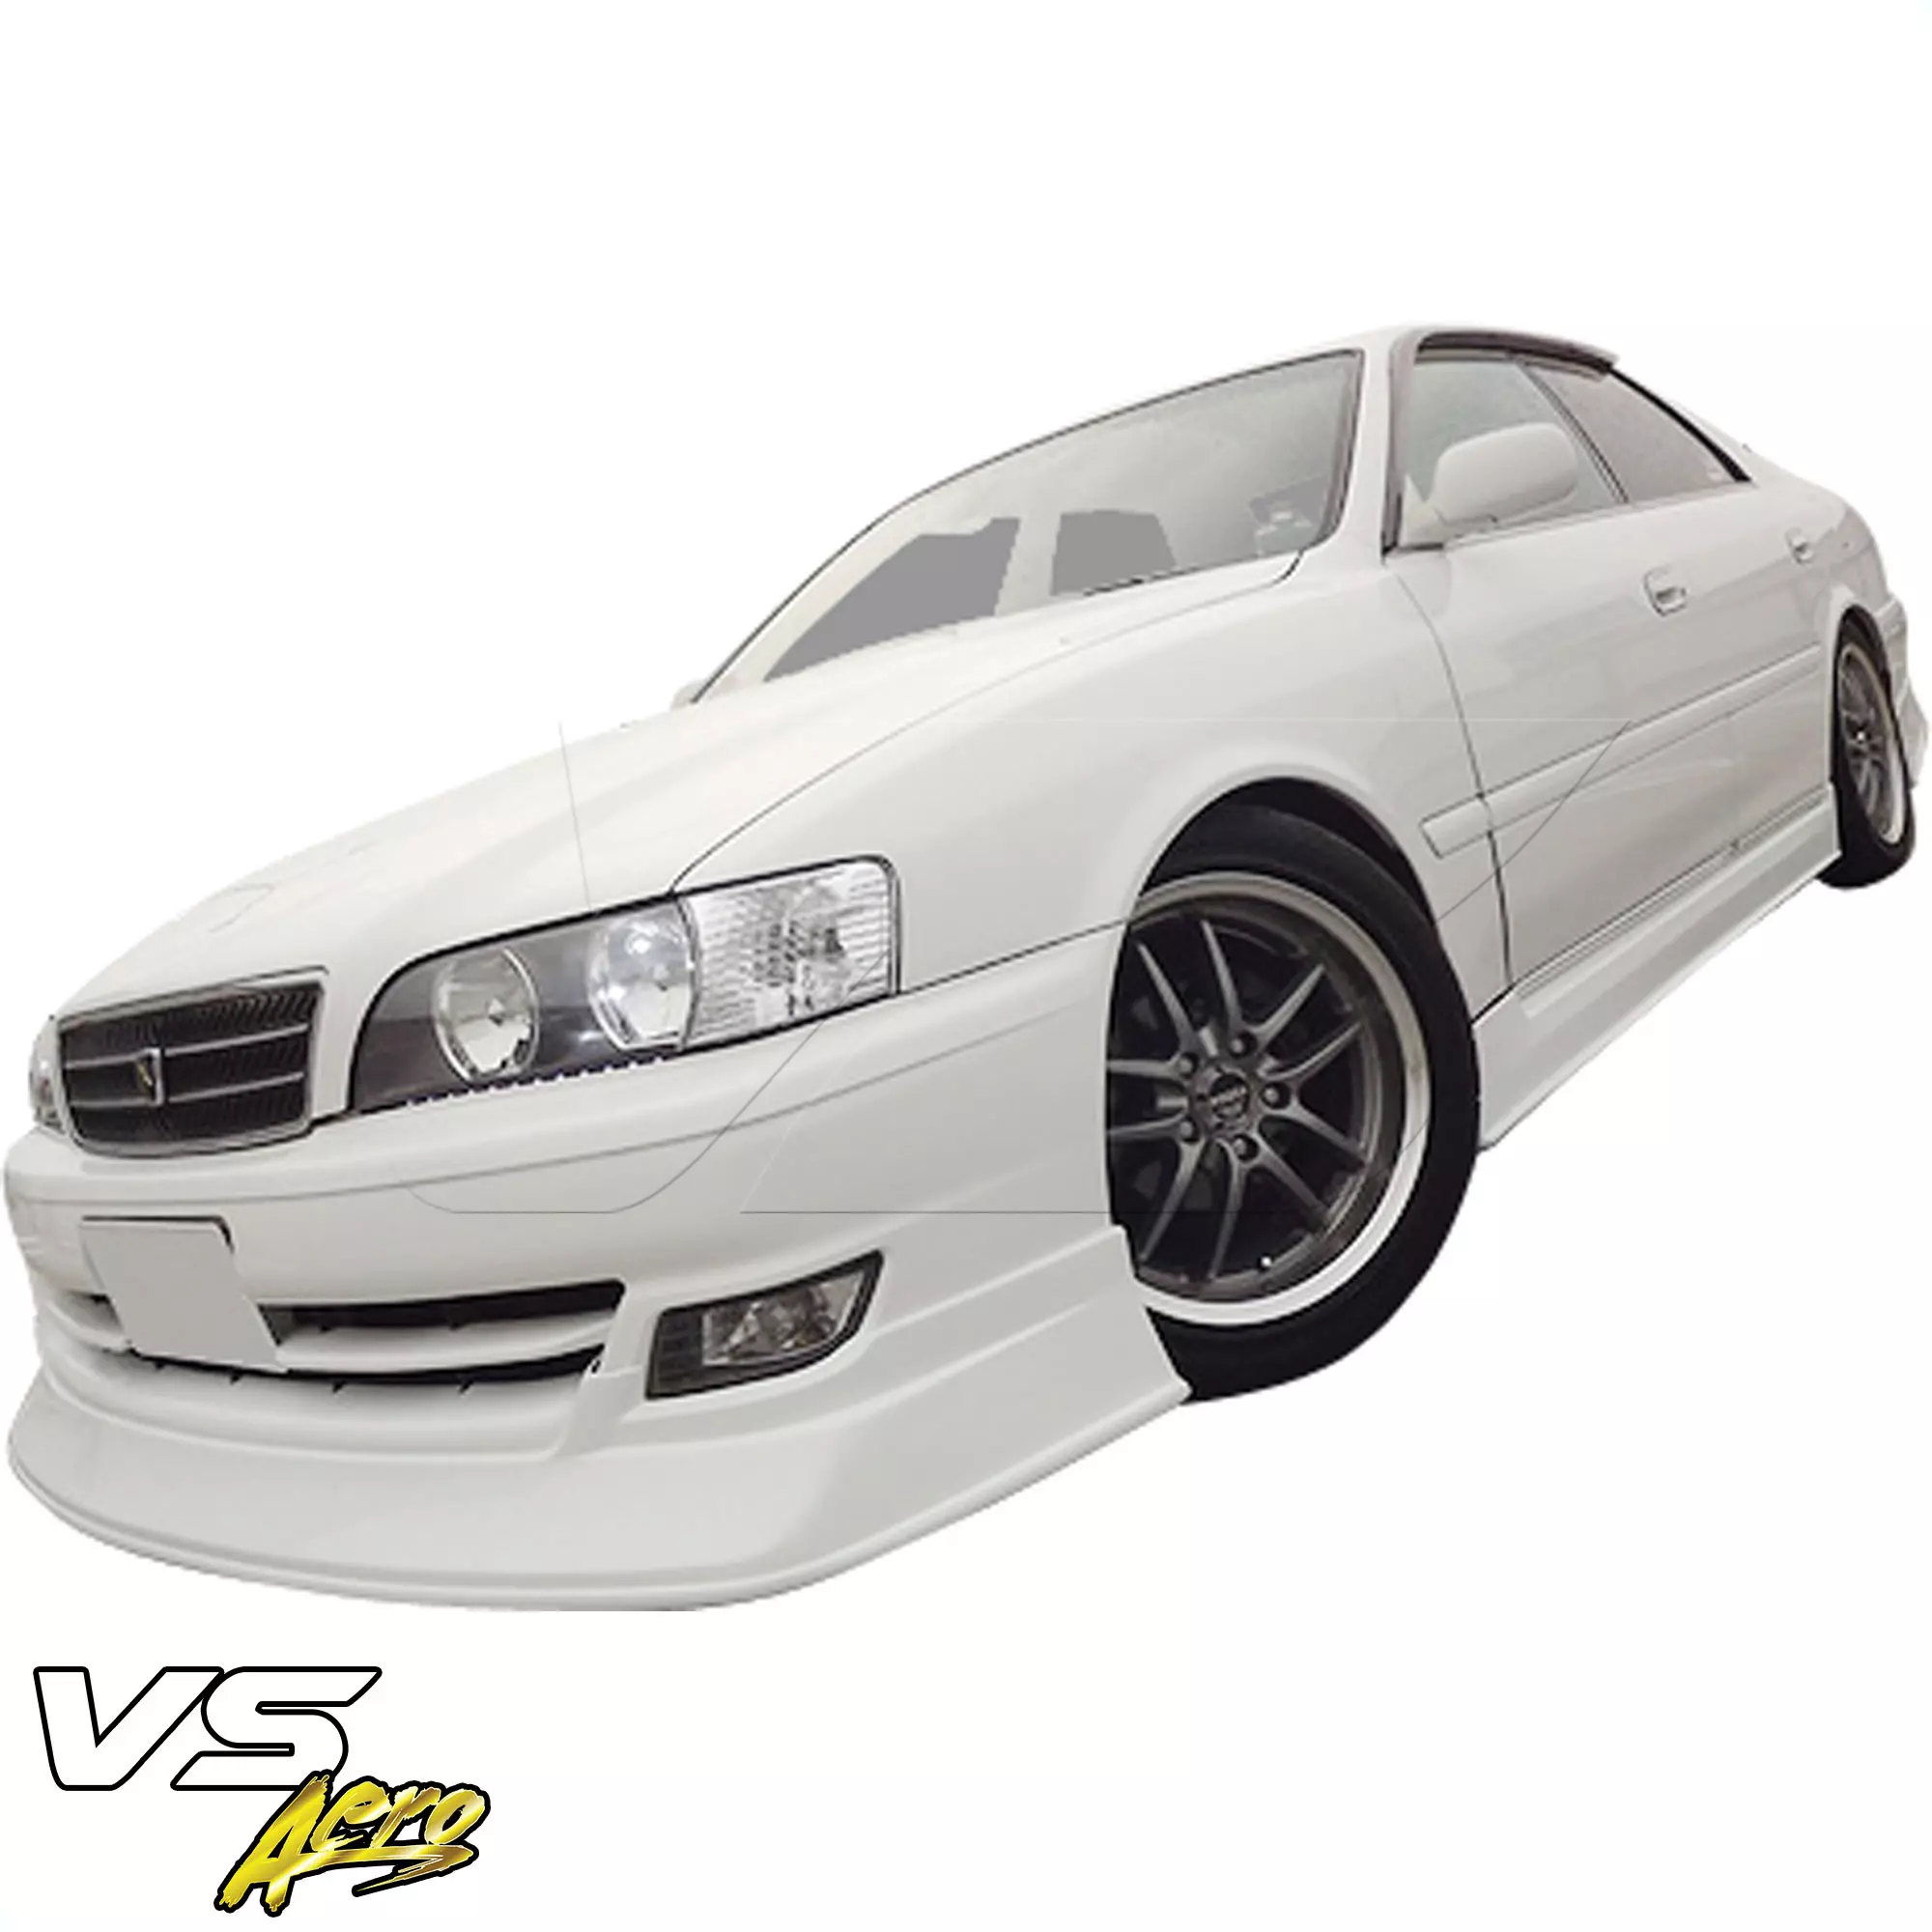 VSaero FRP TRAU Late Front Lip Valance > Toyota Chaser JZX100 1999-2000 - Image 4